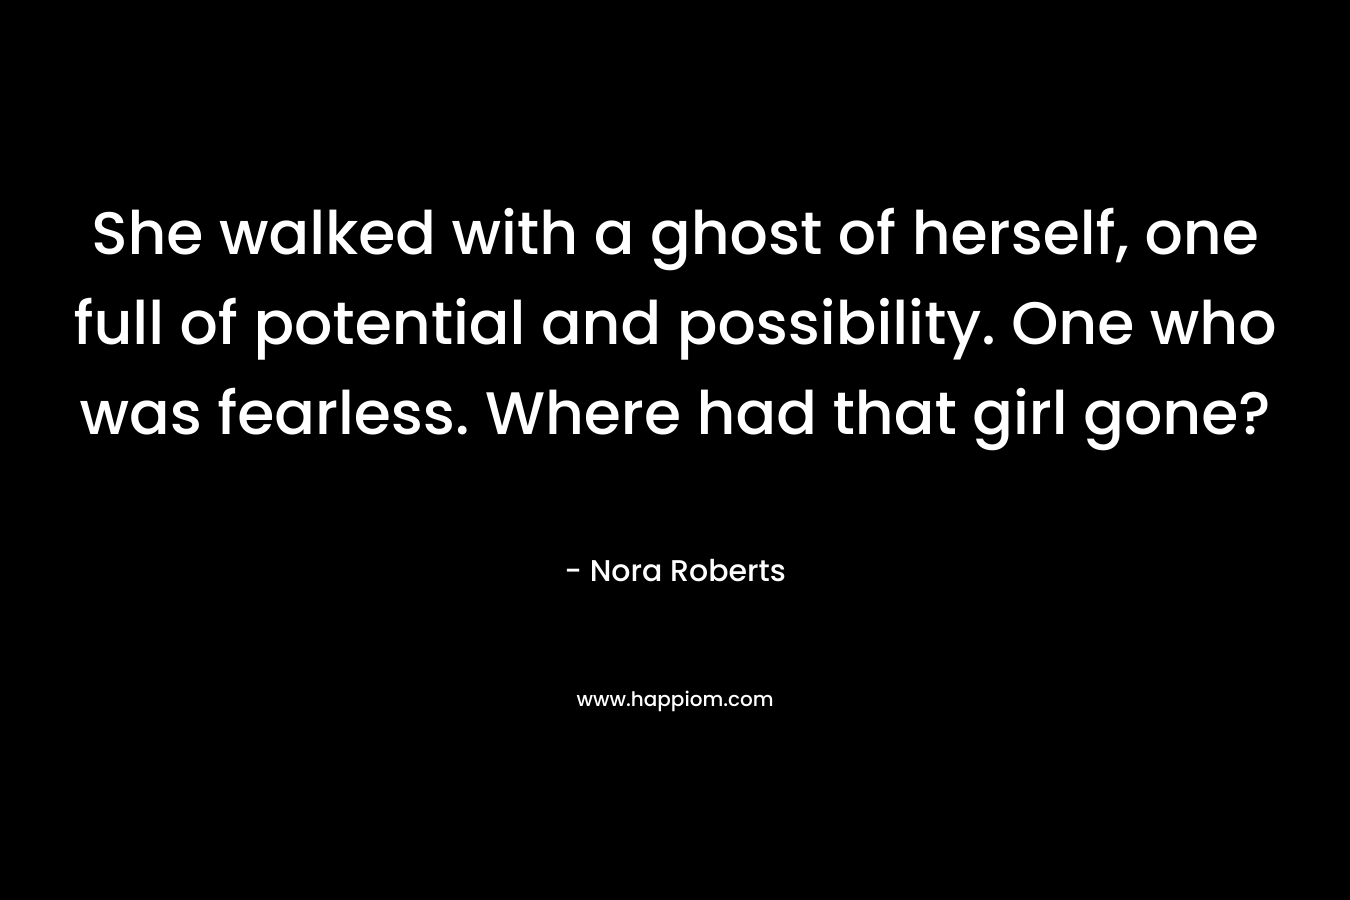 She walked with a ghost of herself, one full of potential and possibility. One who was fearless. Where had that girl gone?